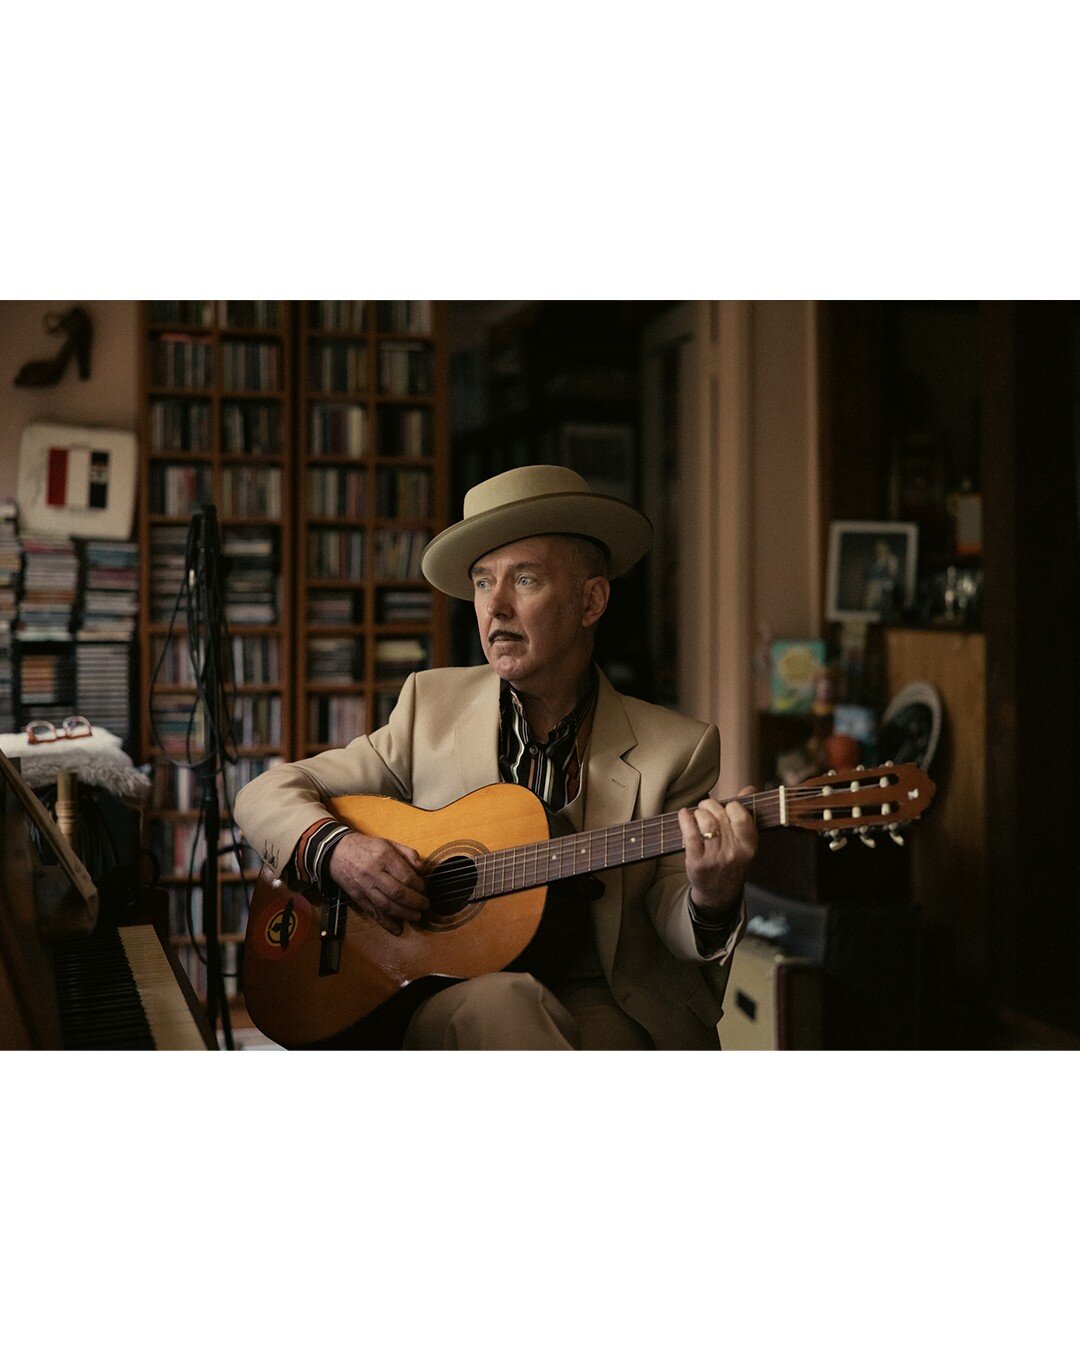 Another fun assignment for @guardianaustralia I was sent to the home of Australian music legends Dave Graney and Clare Moore to take their portraits for a story on the reuniting of the Coral Snakes for a tour of the album Night of the Wolverine to co